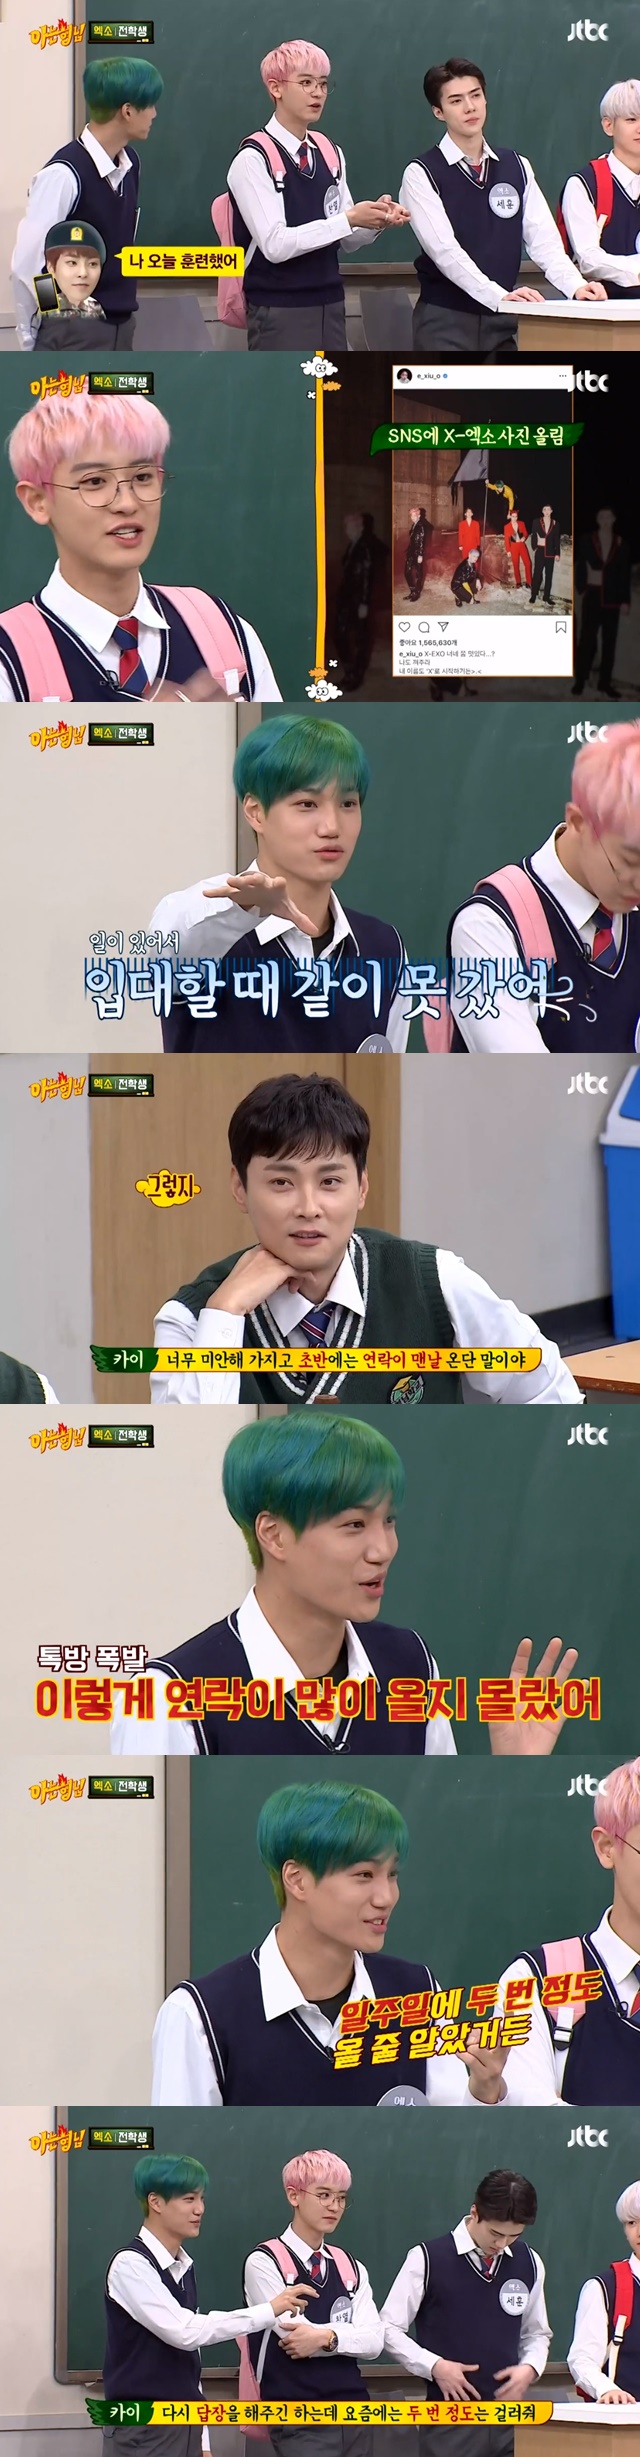 EXO members revealed that they changed after enlisting Xiumin and EXO D.O.EXO appeared on JTBC Knowing Bros broadcast on December 7 and talked.Members of the EXO, who appeared as a six-member on the day, said: Members Xiumin and EXO D.O. have gone to the military, they may be watching this broadcast now.In particular, Baek Hyun said, The waiting room has become too wide. I feel it when I eat.Suho said, There are more parts. Seo Jang-hoon said, There are more parts, more income? And EXO members said, Yes.In particular, Chanyeol said, In the army these days, you can use your cell phone during your day. Xiumin talks more than we do in group chat rooms.I said, What did you do today? he tipped off after 6 p.m.Asked if he had gone to visit, Chanyeol said, I told him not to come, and Kai said, If theres any reason, Ill go; Ive been so busy so far.Kai said, In the case of Xiumin, I could not go because I had work to do when I joined the army. I was so sorry that I was always in touch at the beginning.But I did not know that there would be so much contact, he laughed.I thought Id be here twice for One Week, but Im getting in touch all the time, Im getting my schedule, he added.Asked if EXO D.O. can not contact him, Chanyeol said, When I put the title song candidate on the talk, I said, I like 3 times.pear hyo-ju